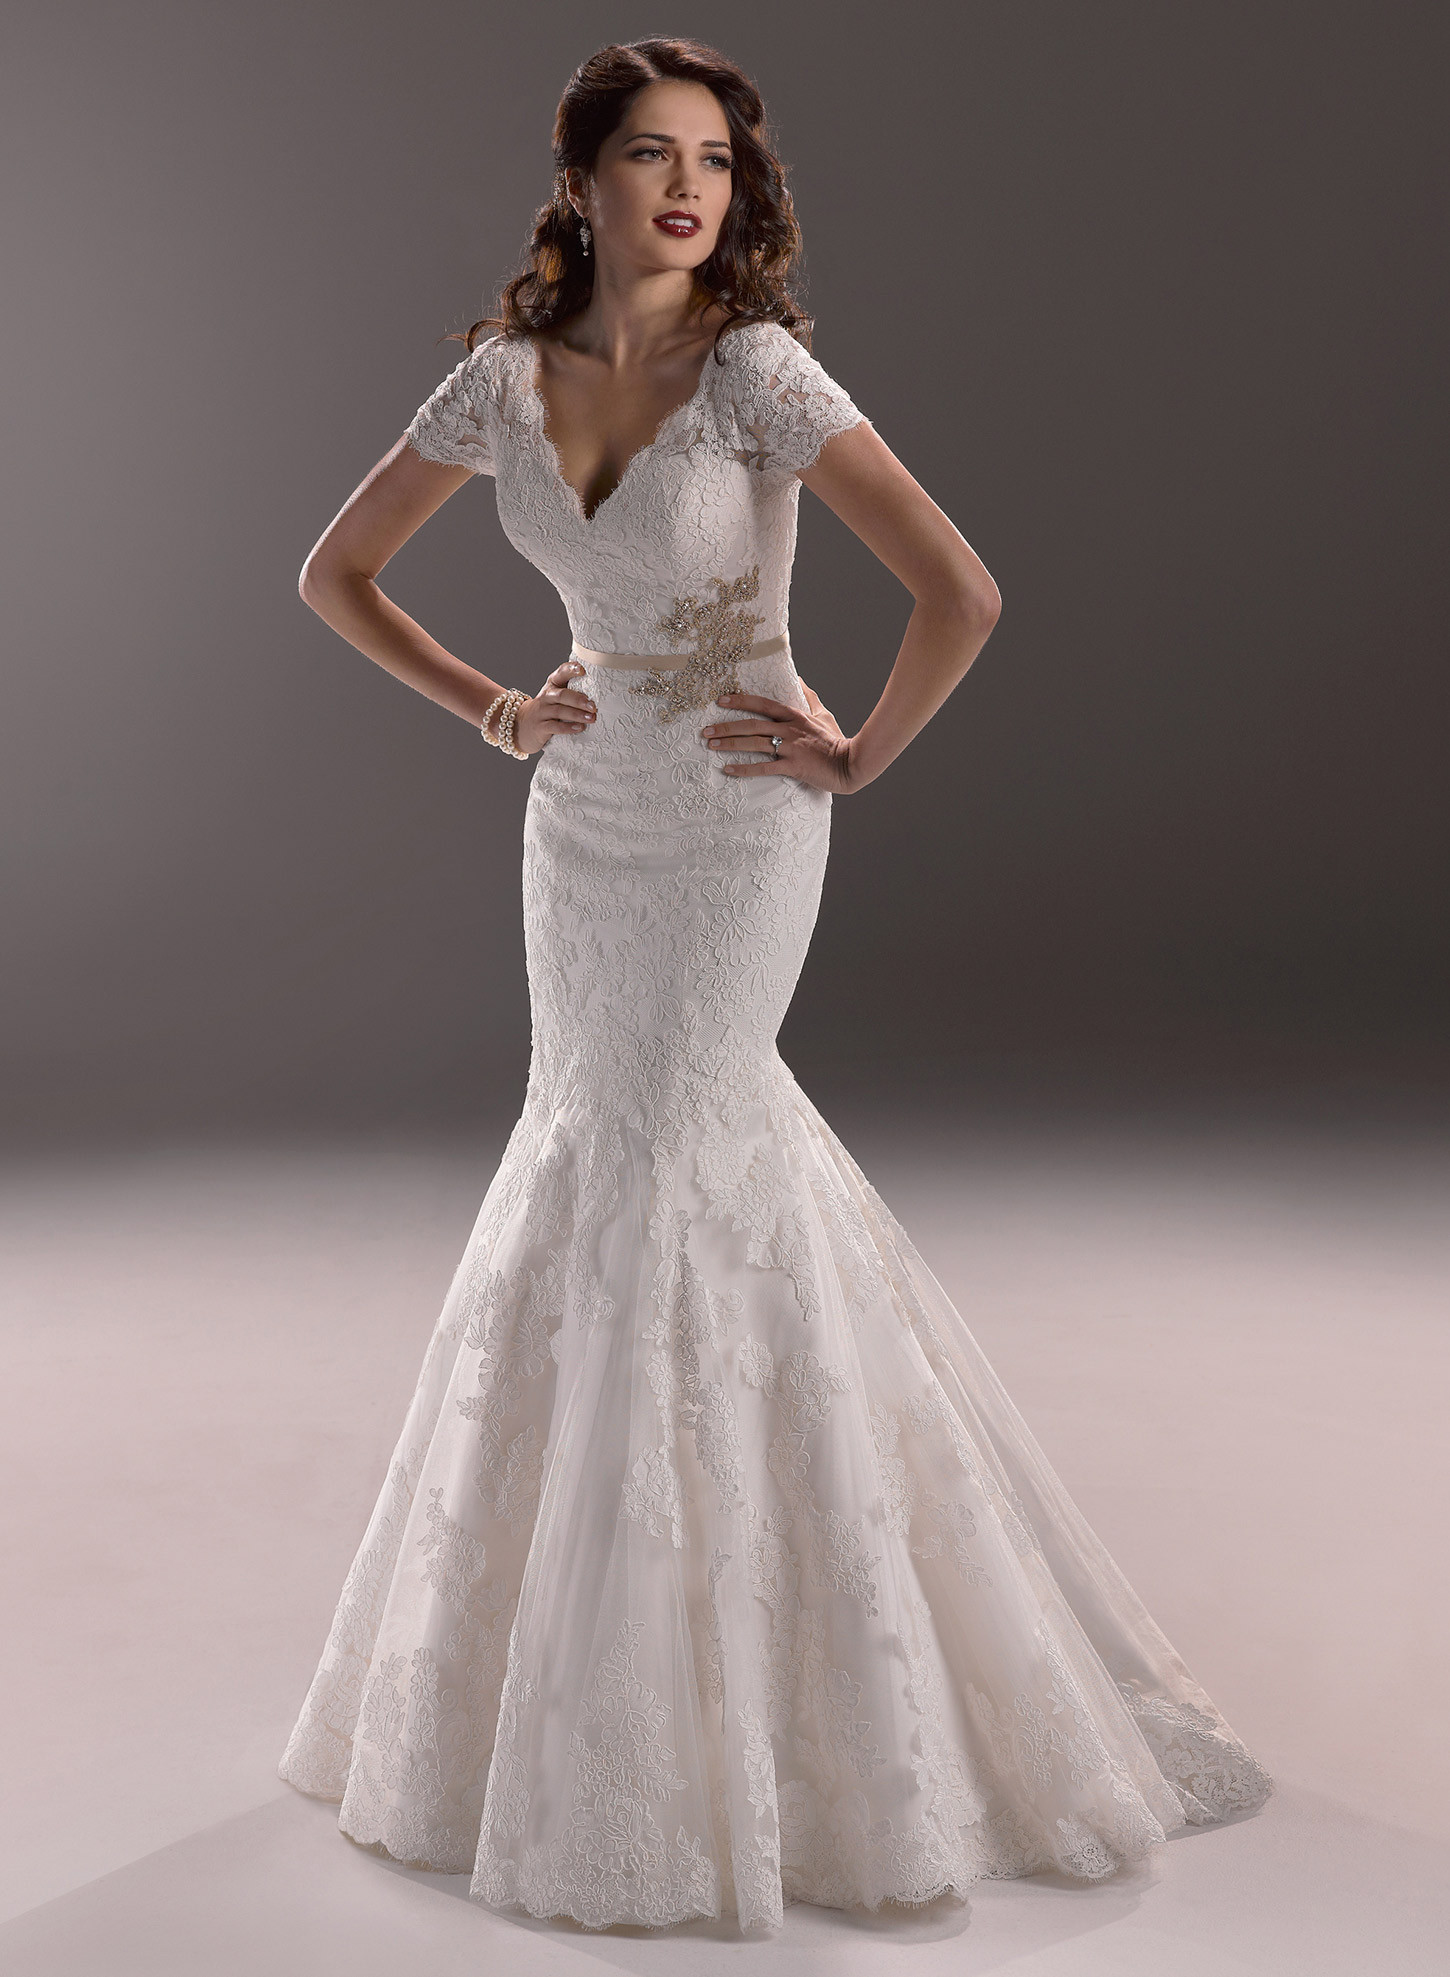 Wedding Dresses Maggie Sottero
 This just in New Fall 2013 Maggie Sottero Gowns